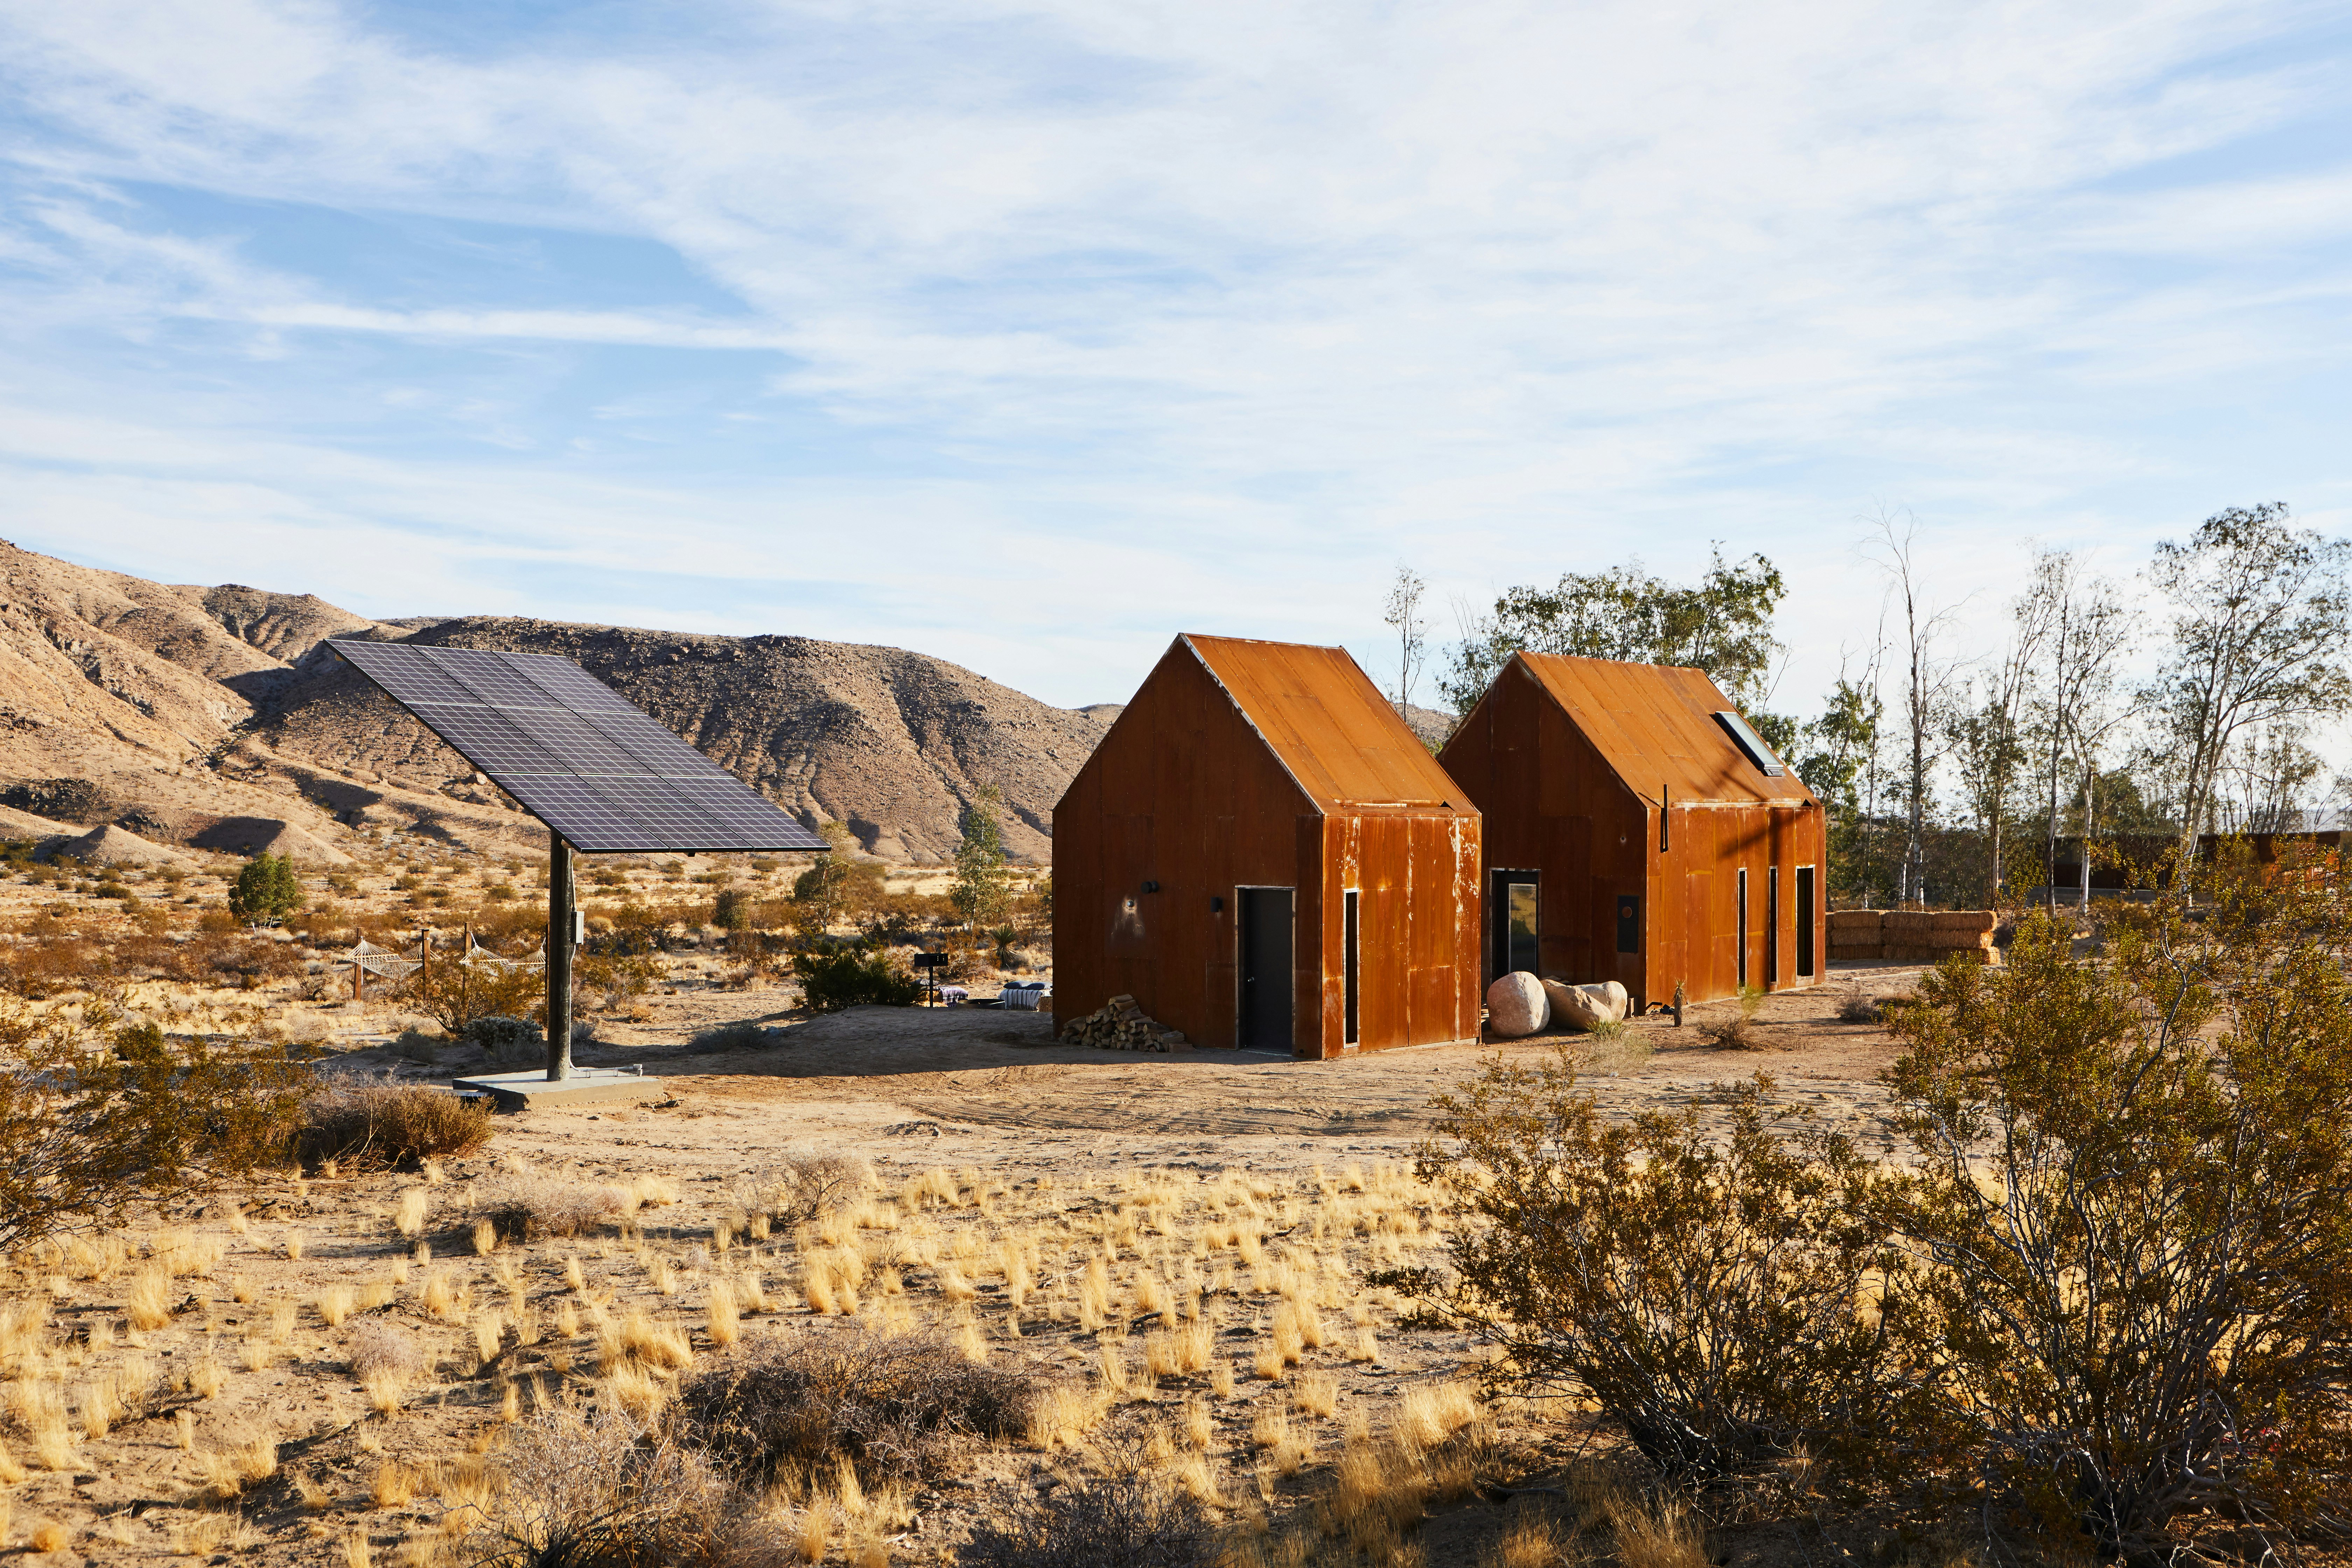 Tiny guest house complete! ✓ …. Off grid life is so crispy in Joshua Tree  🌵